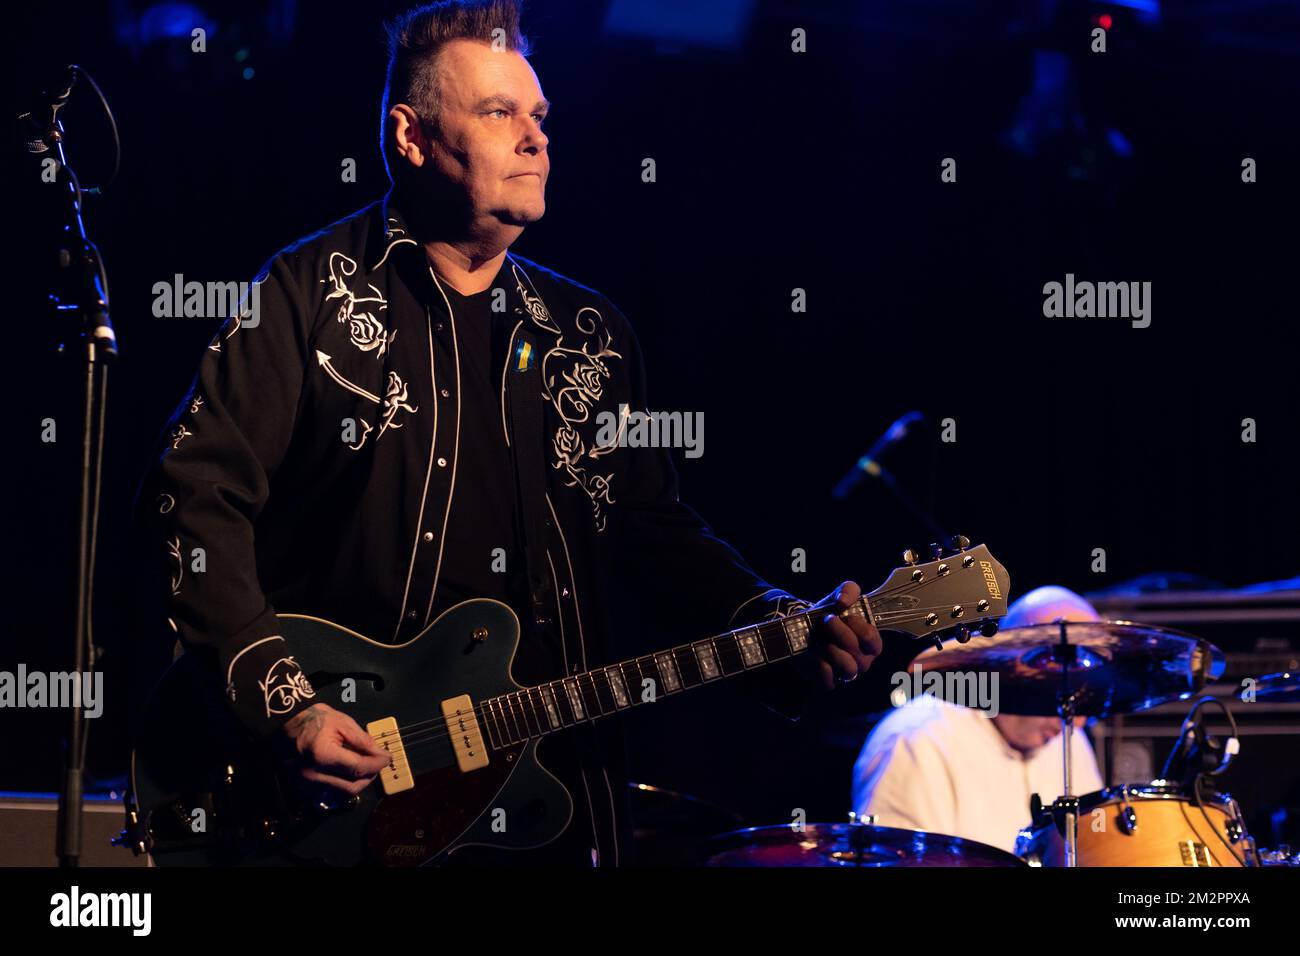 Oxford, United Kingdom. 12th, December 2022. The English post-punk band The Membranes performs a live concert at the O2 Academy Oxford in Oxford. Here guitarist Peter Byrchmore is seen live on stage. (Photo credit: Gonzales Photo – Per-Otto Oppi). Stock Photo